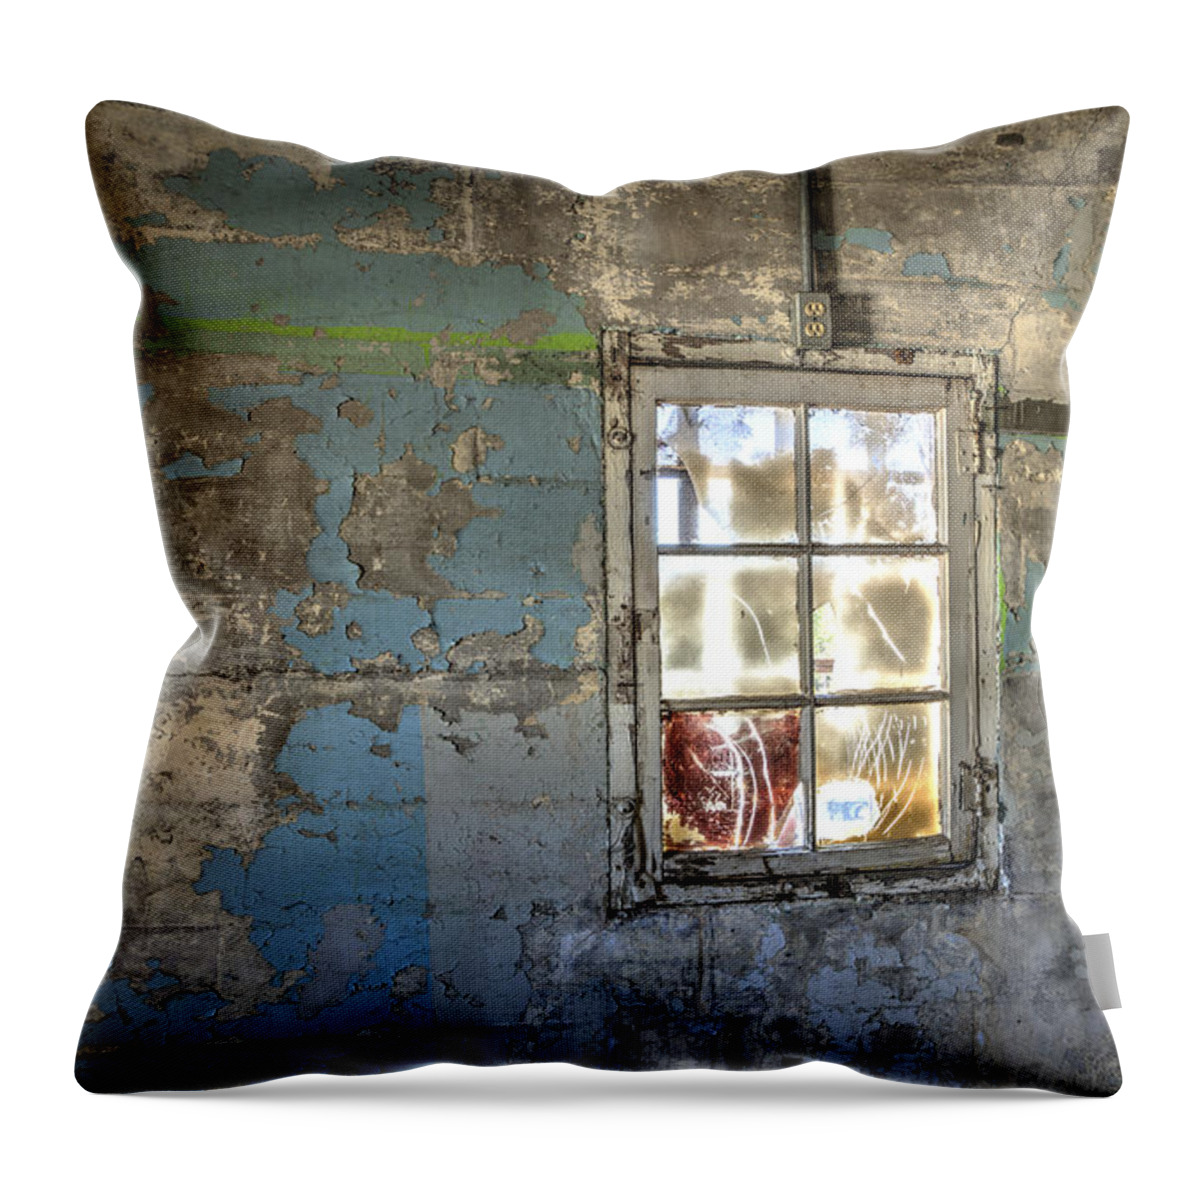 Doors Throw Pillow featuring the photograph Trustee-3 by Charles Hite